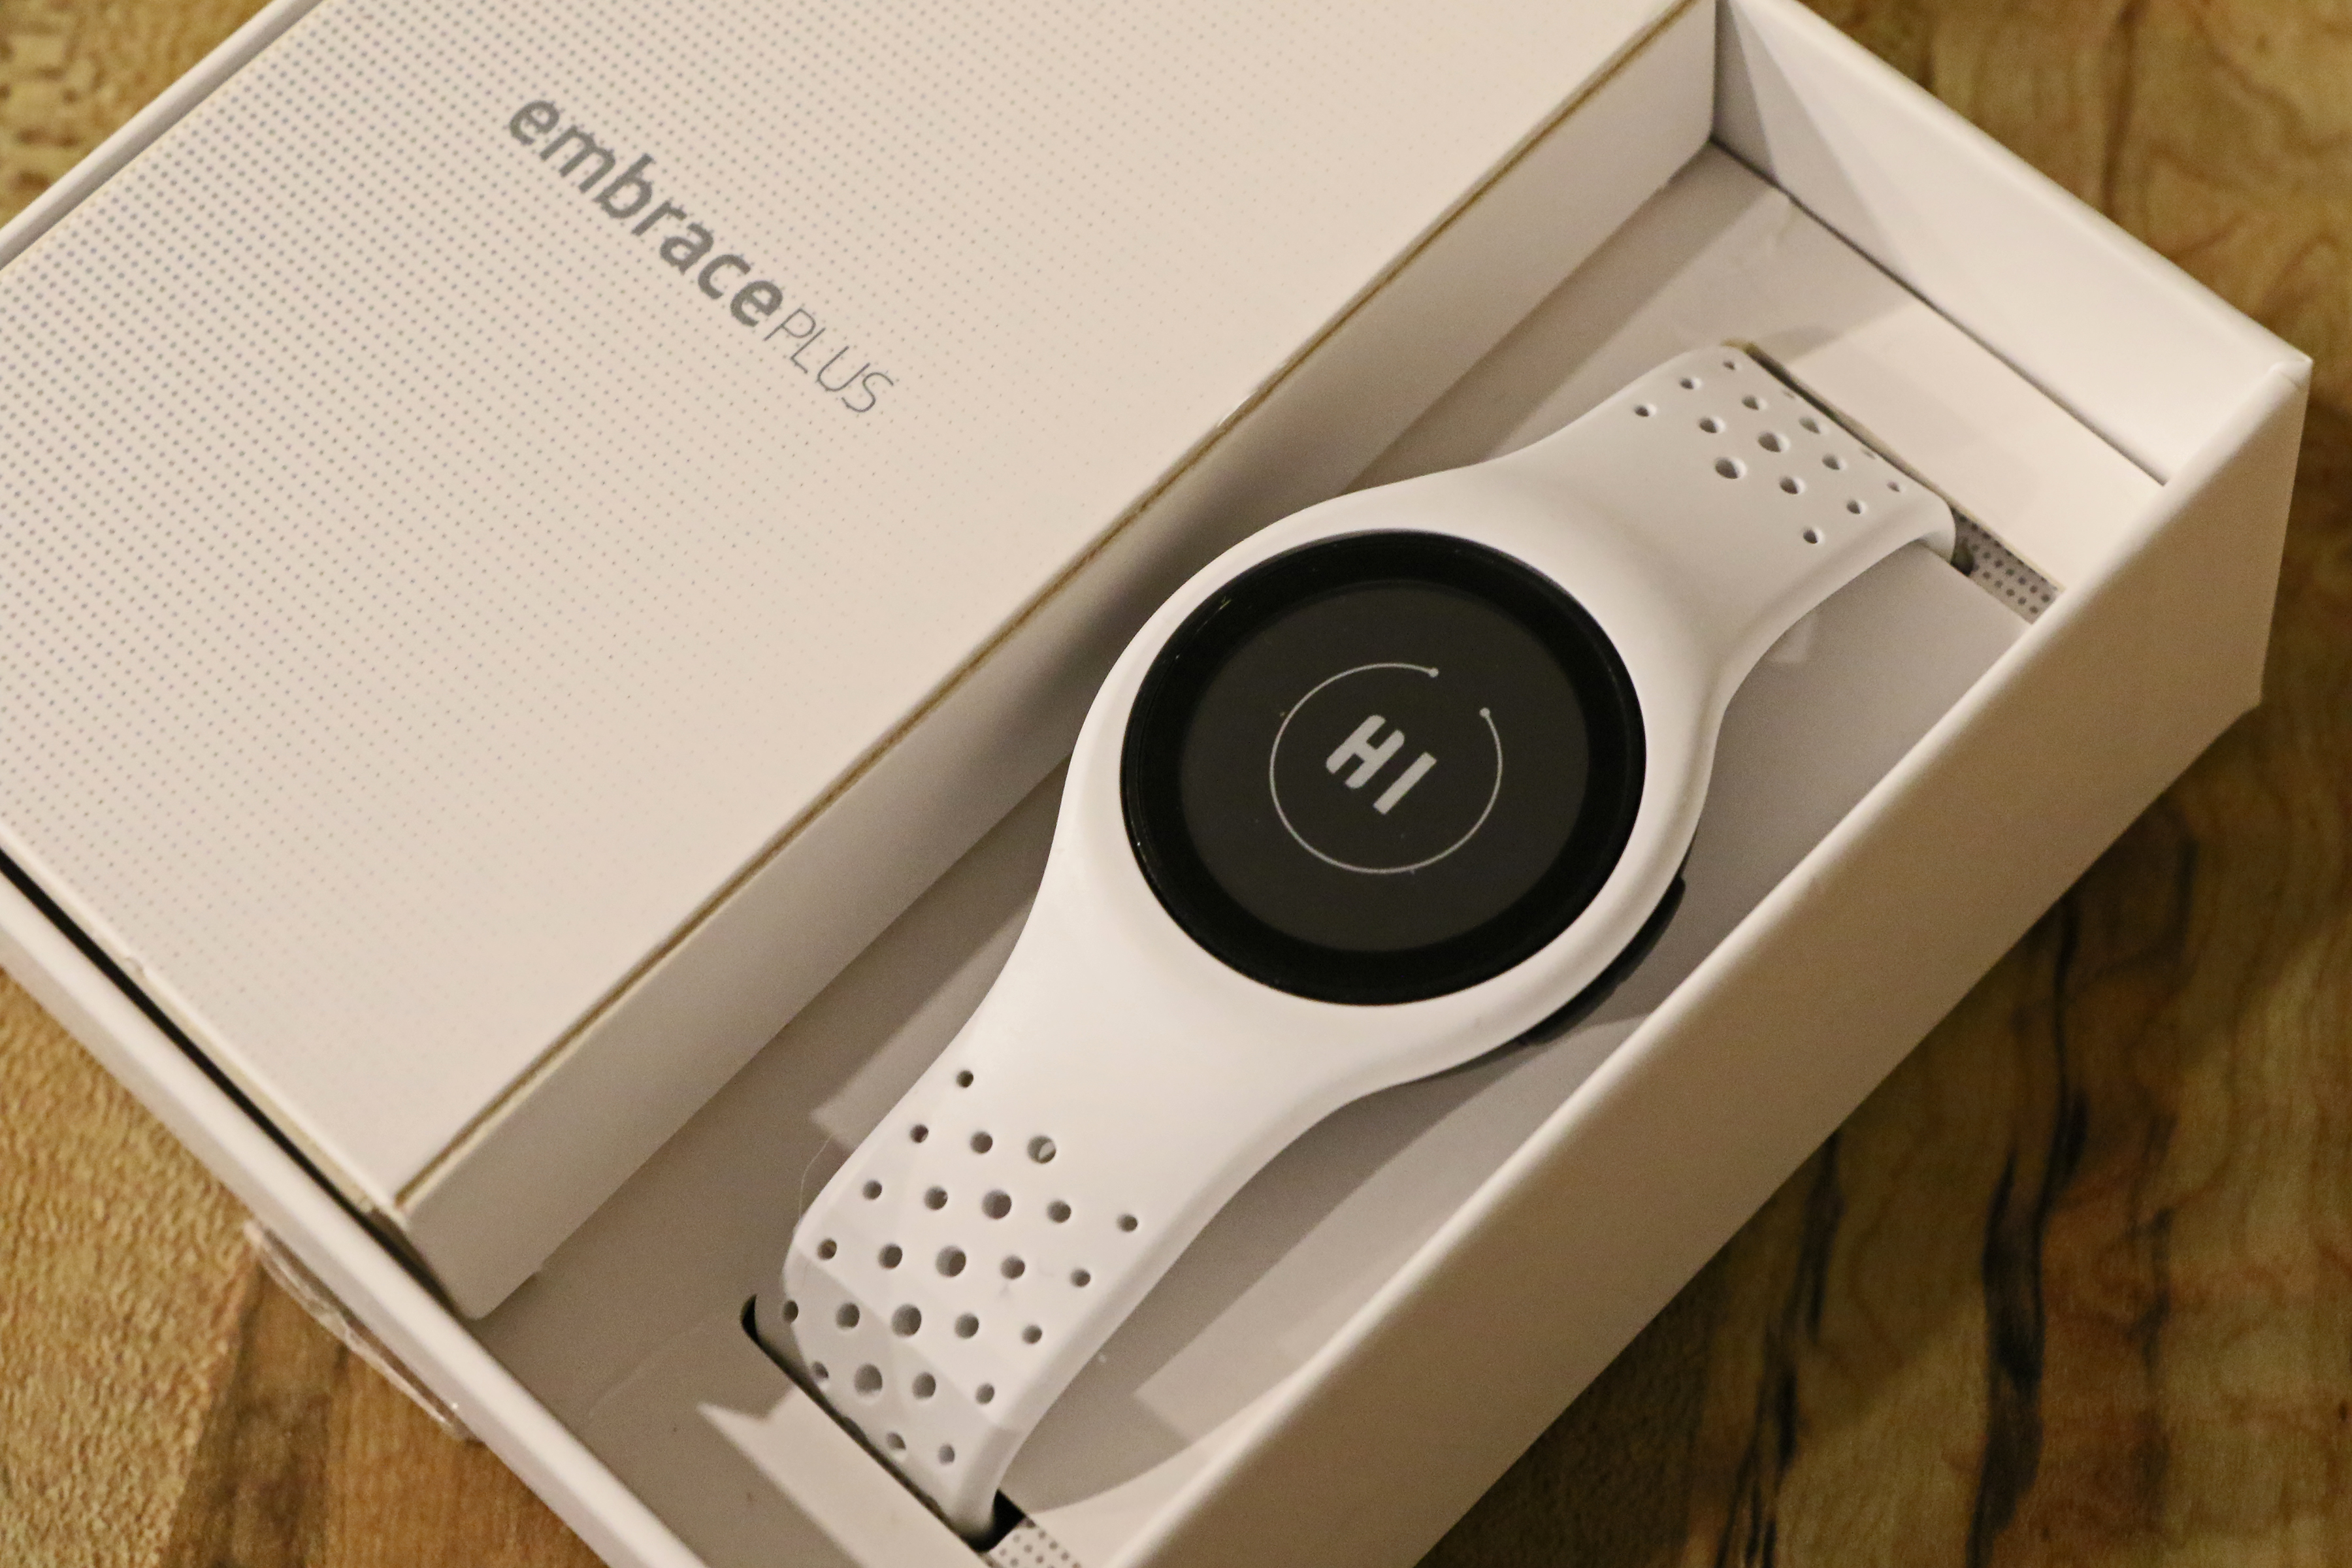 A close-up of the Embrace Plus Wrist Wearable.